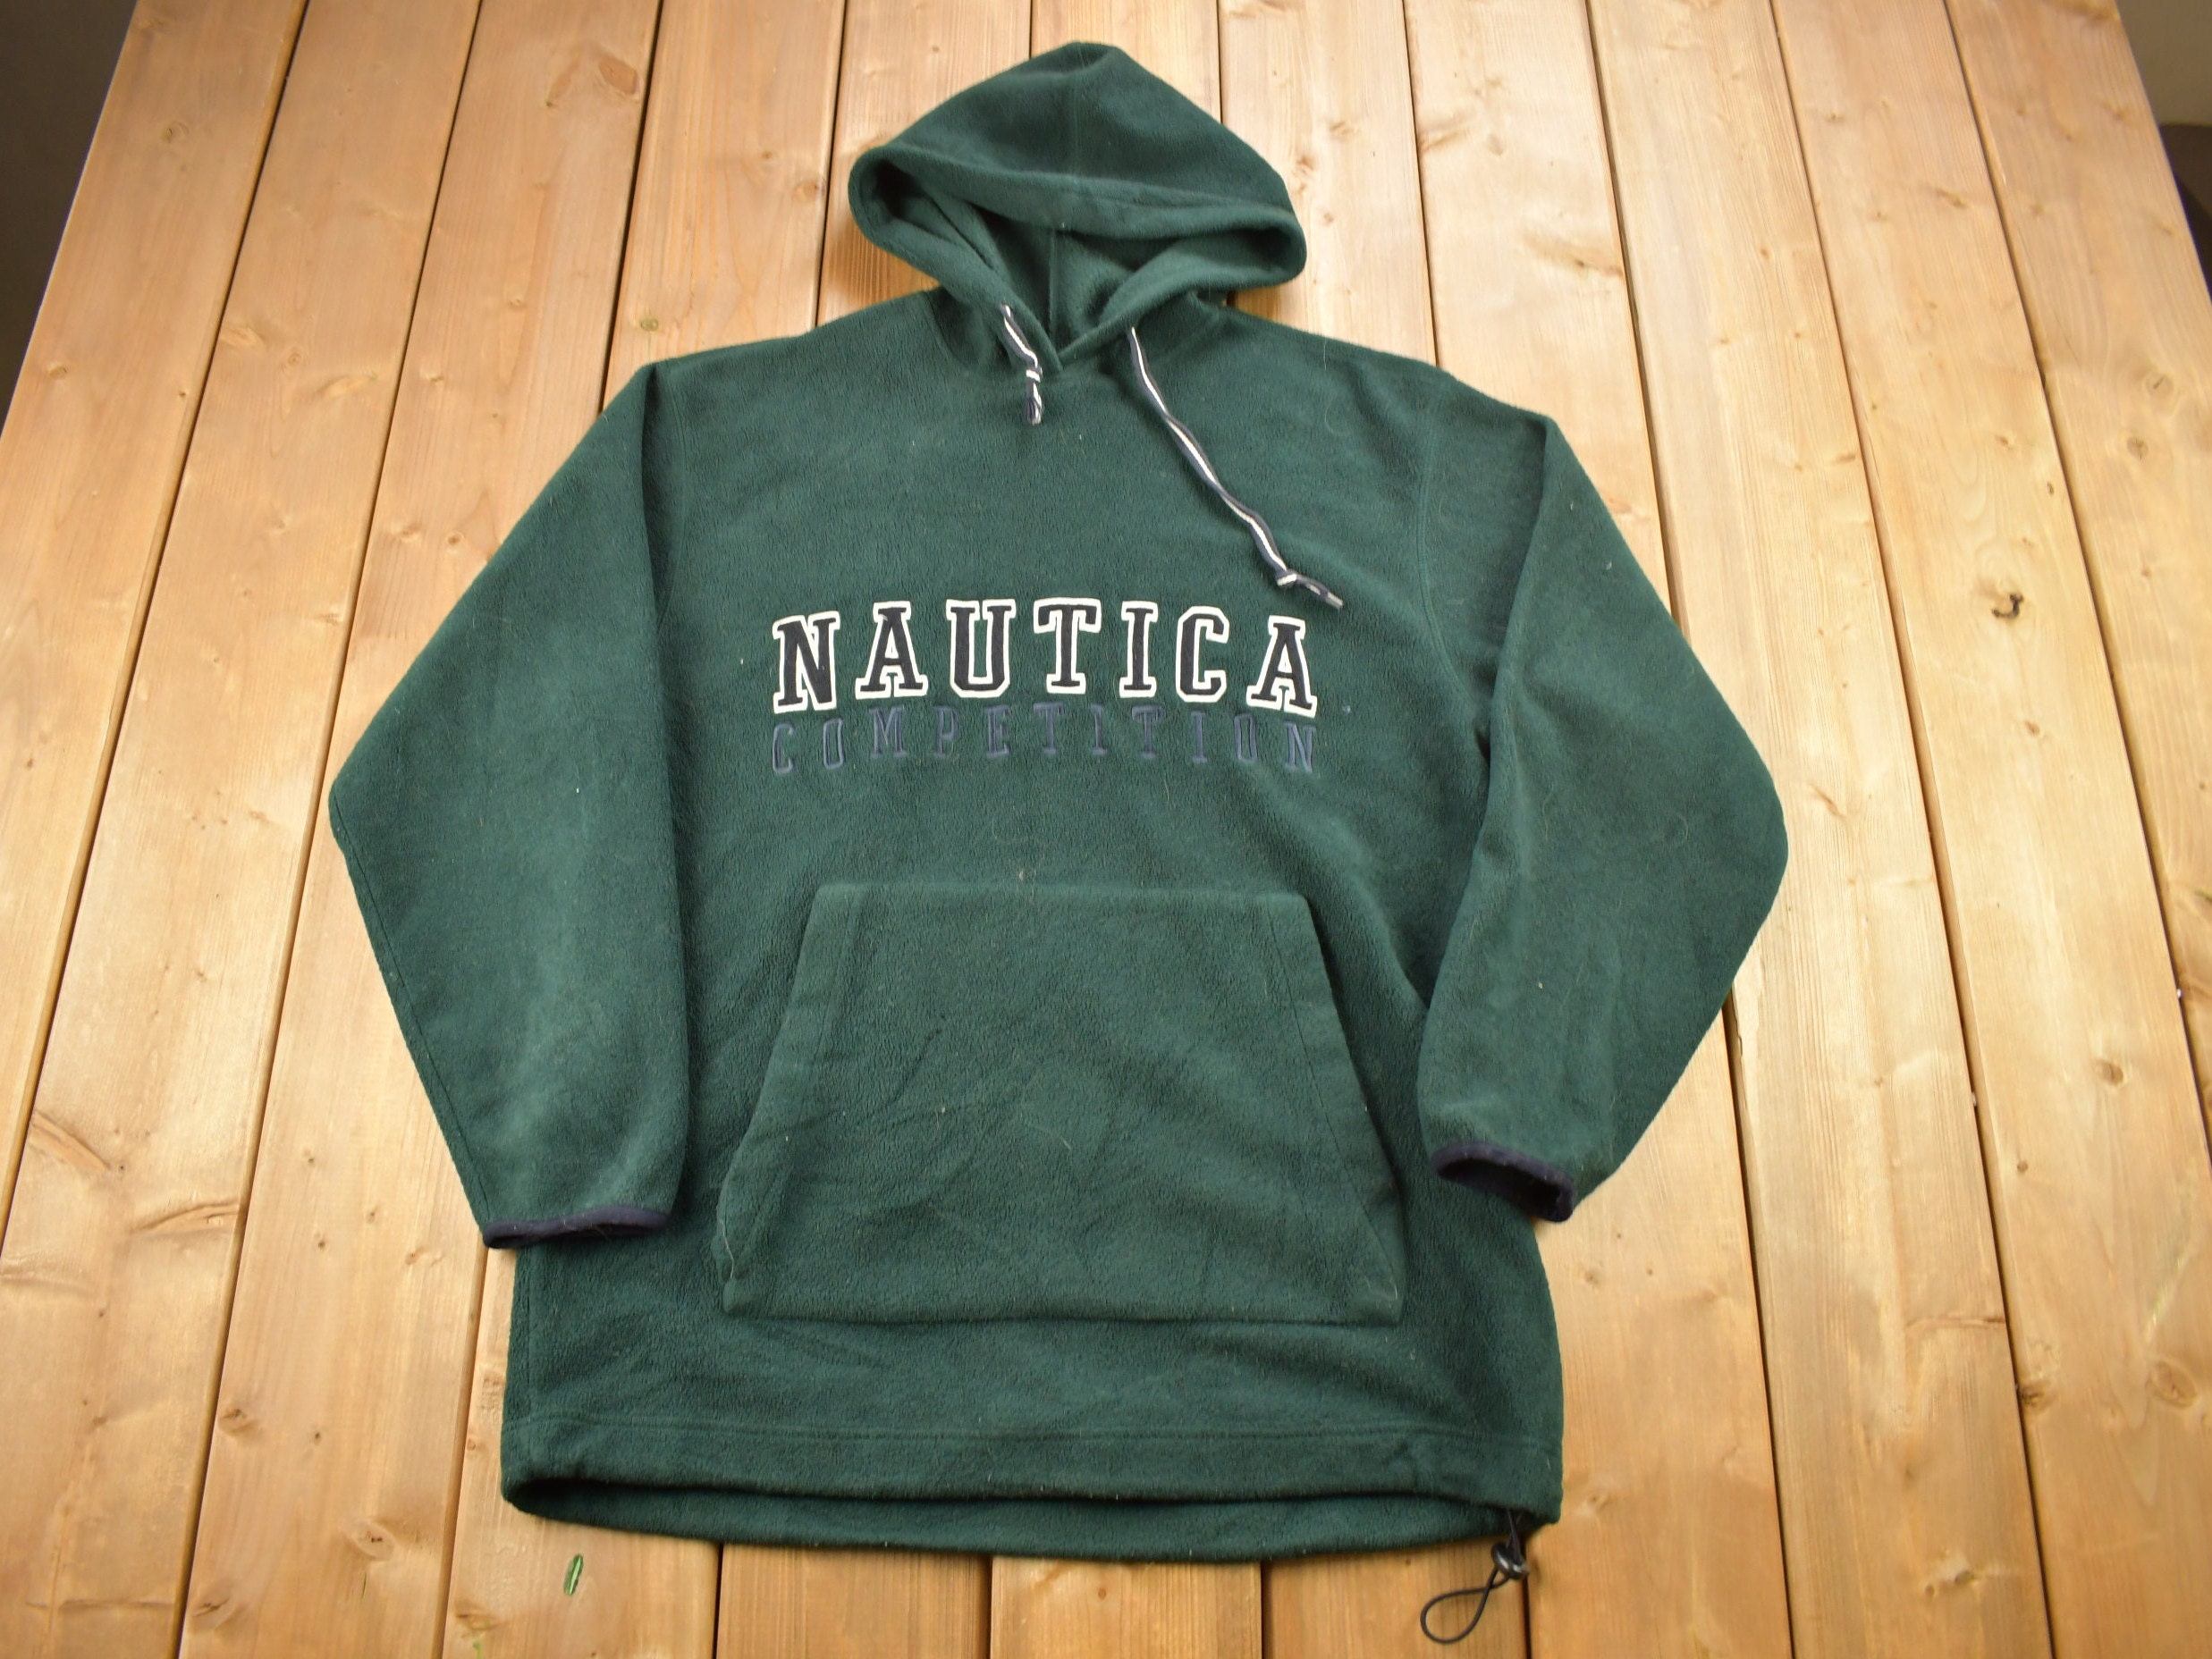 Vintage 1990s Nautica Competition Embroidered Fleece Hoodie / Vintage  Nautica / Green Hoodie / Streetwear / Made In USA -  Portugal